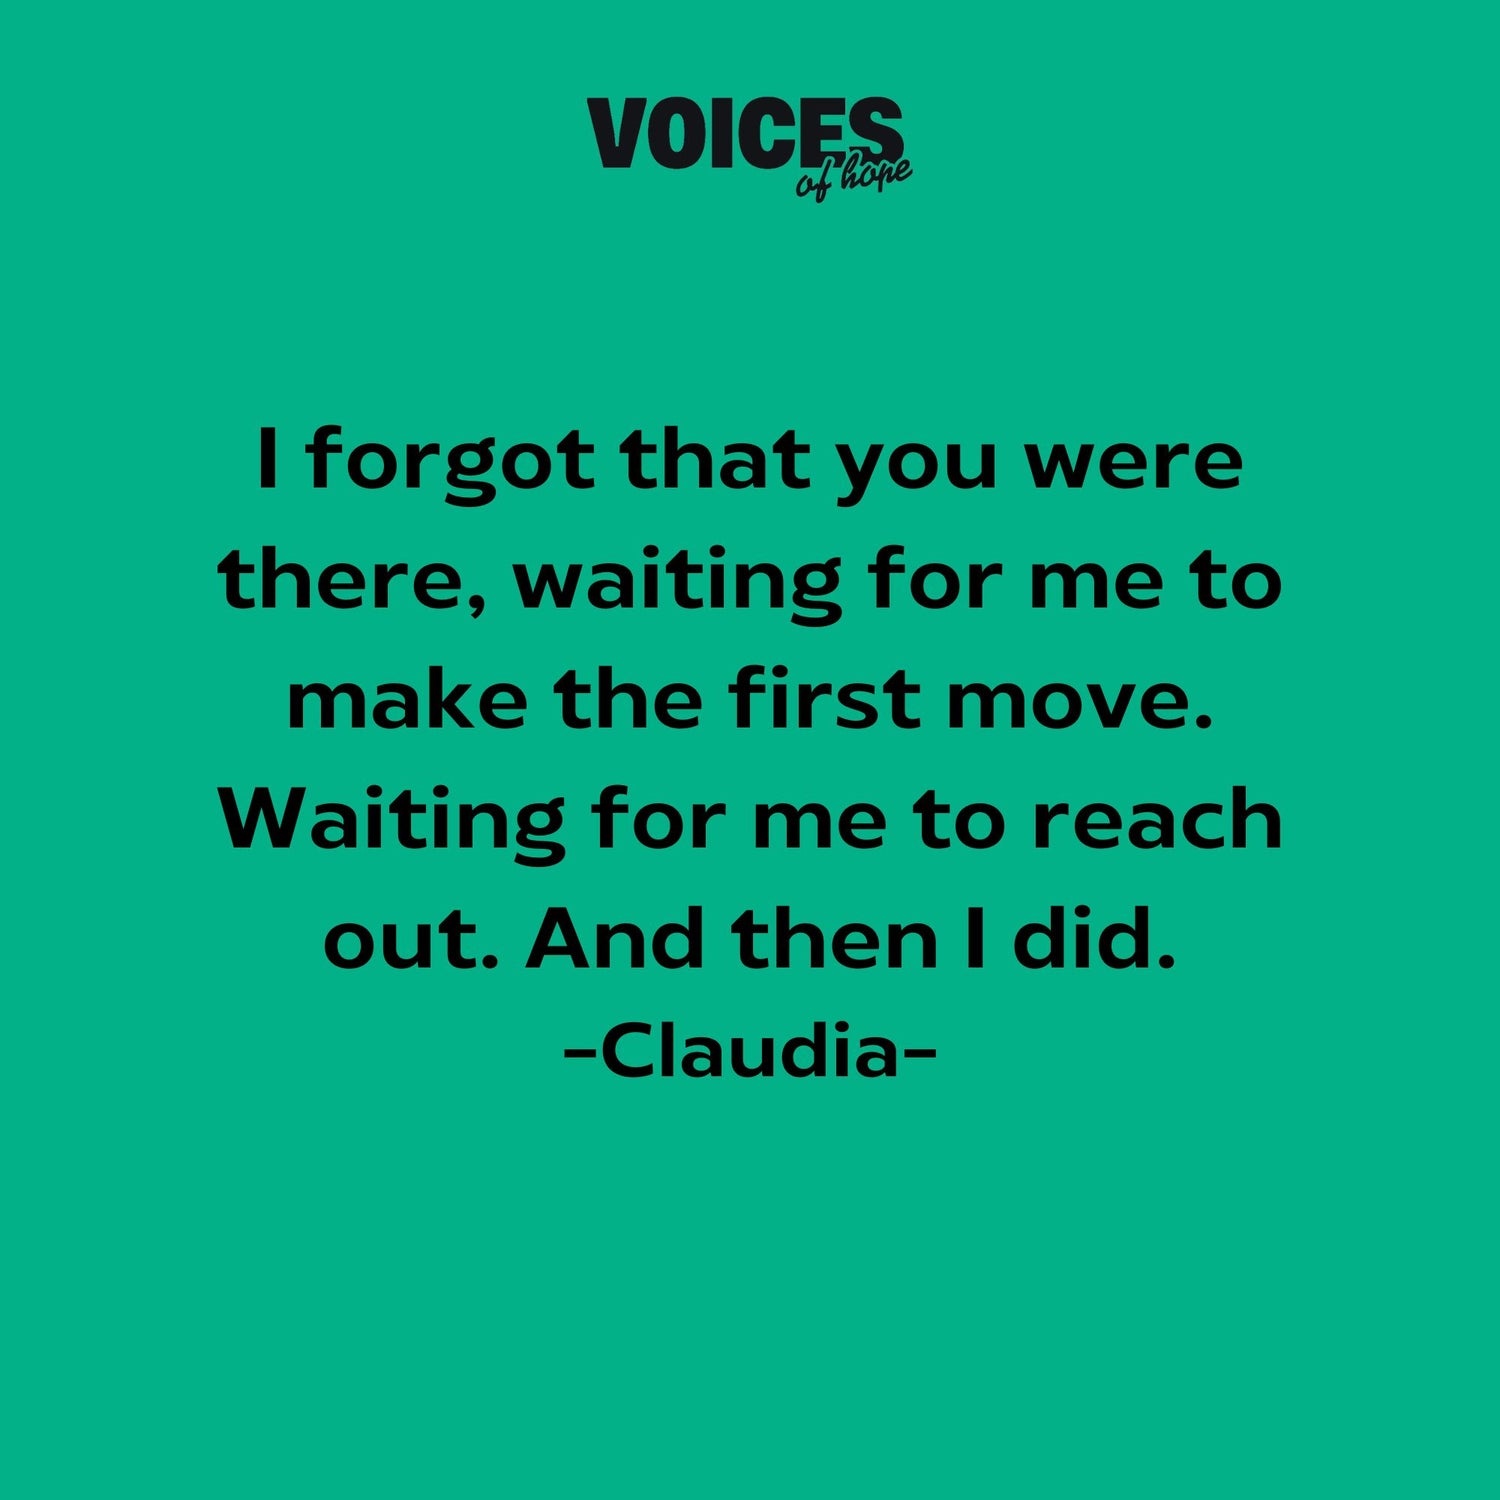 Green background with black writing that reads: "I forgot that you were there, waiting for me to make the first move. Waiting for me to reach out. And then I did. Claudia."